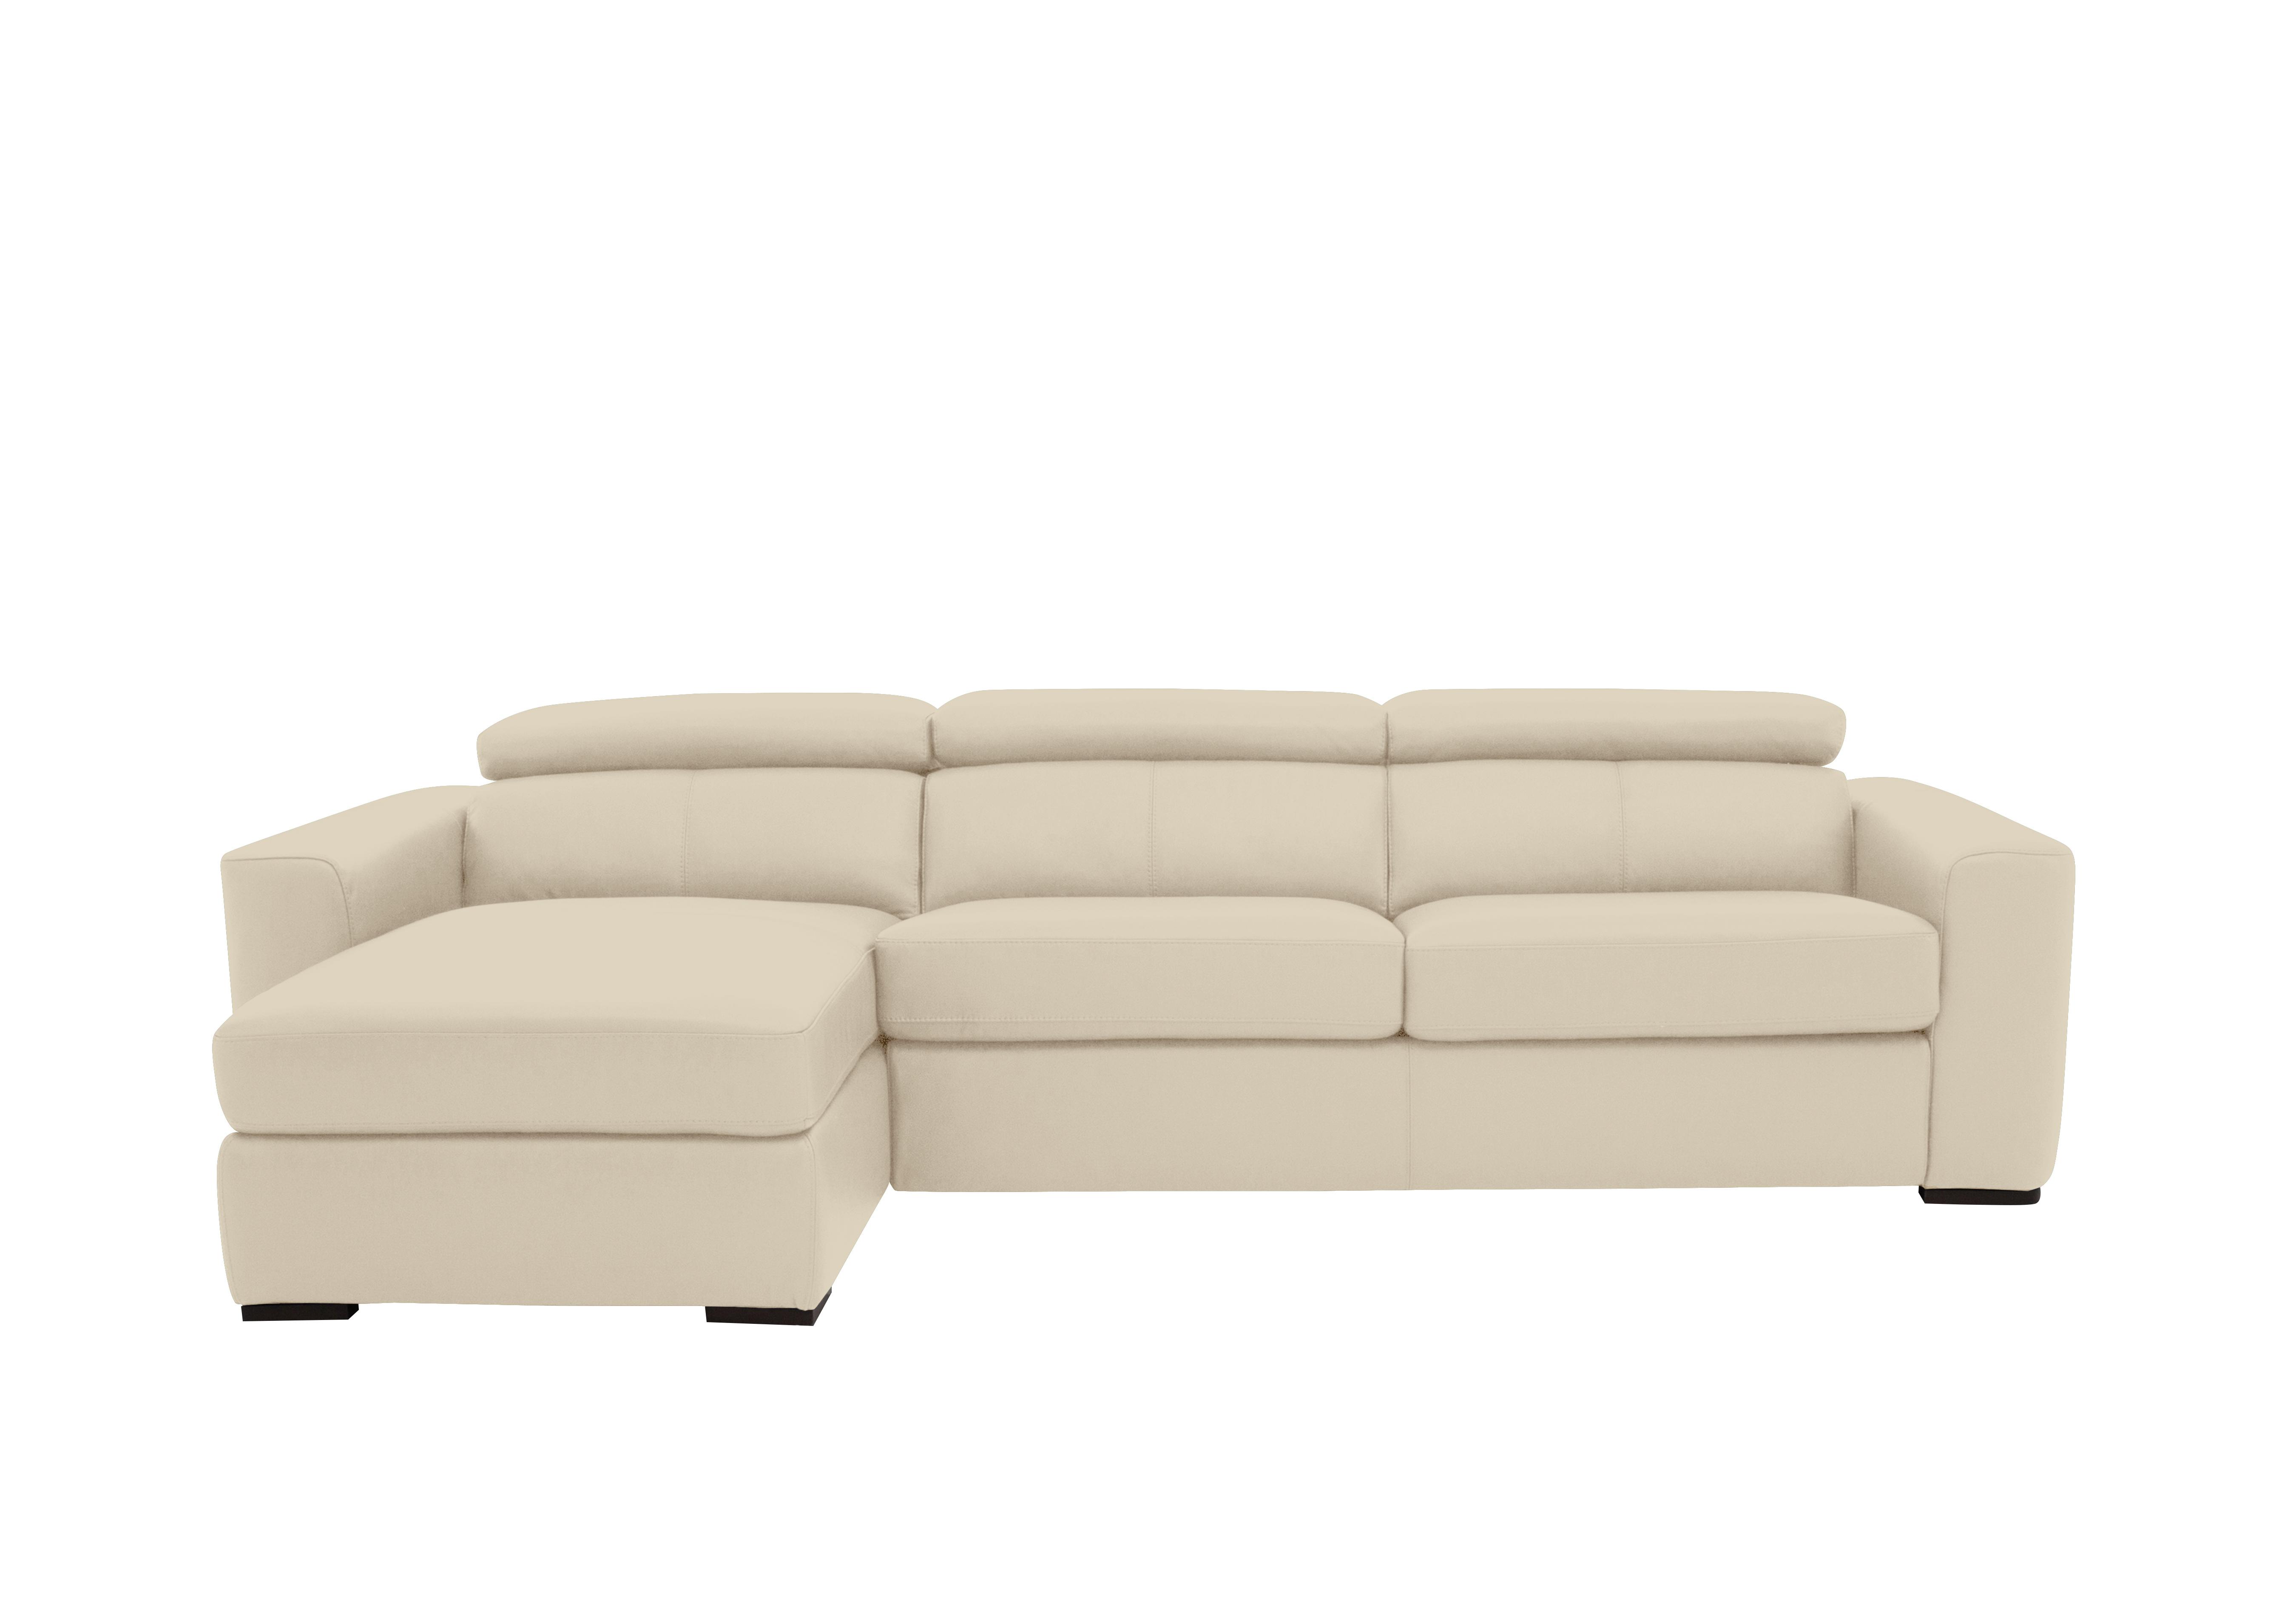 Infinity Leather Corner Chaise Sofabed with Storage in Bv-862c Bisque on Furniture Village